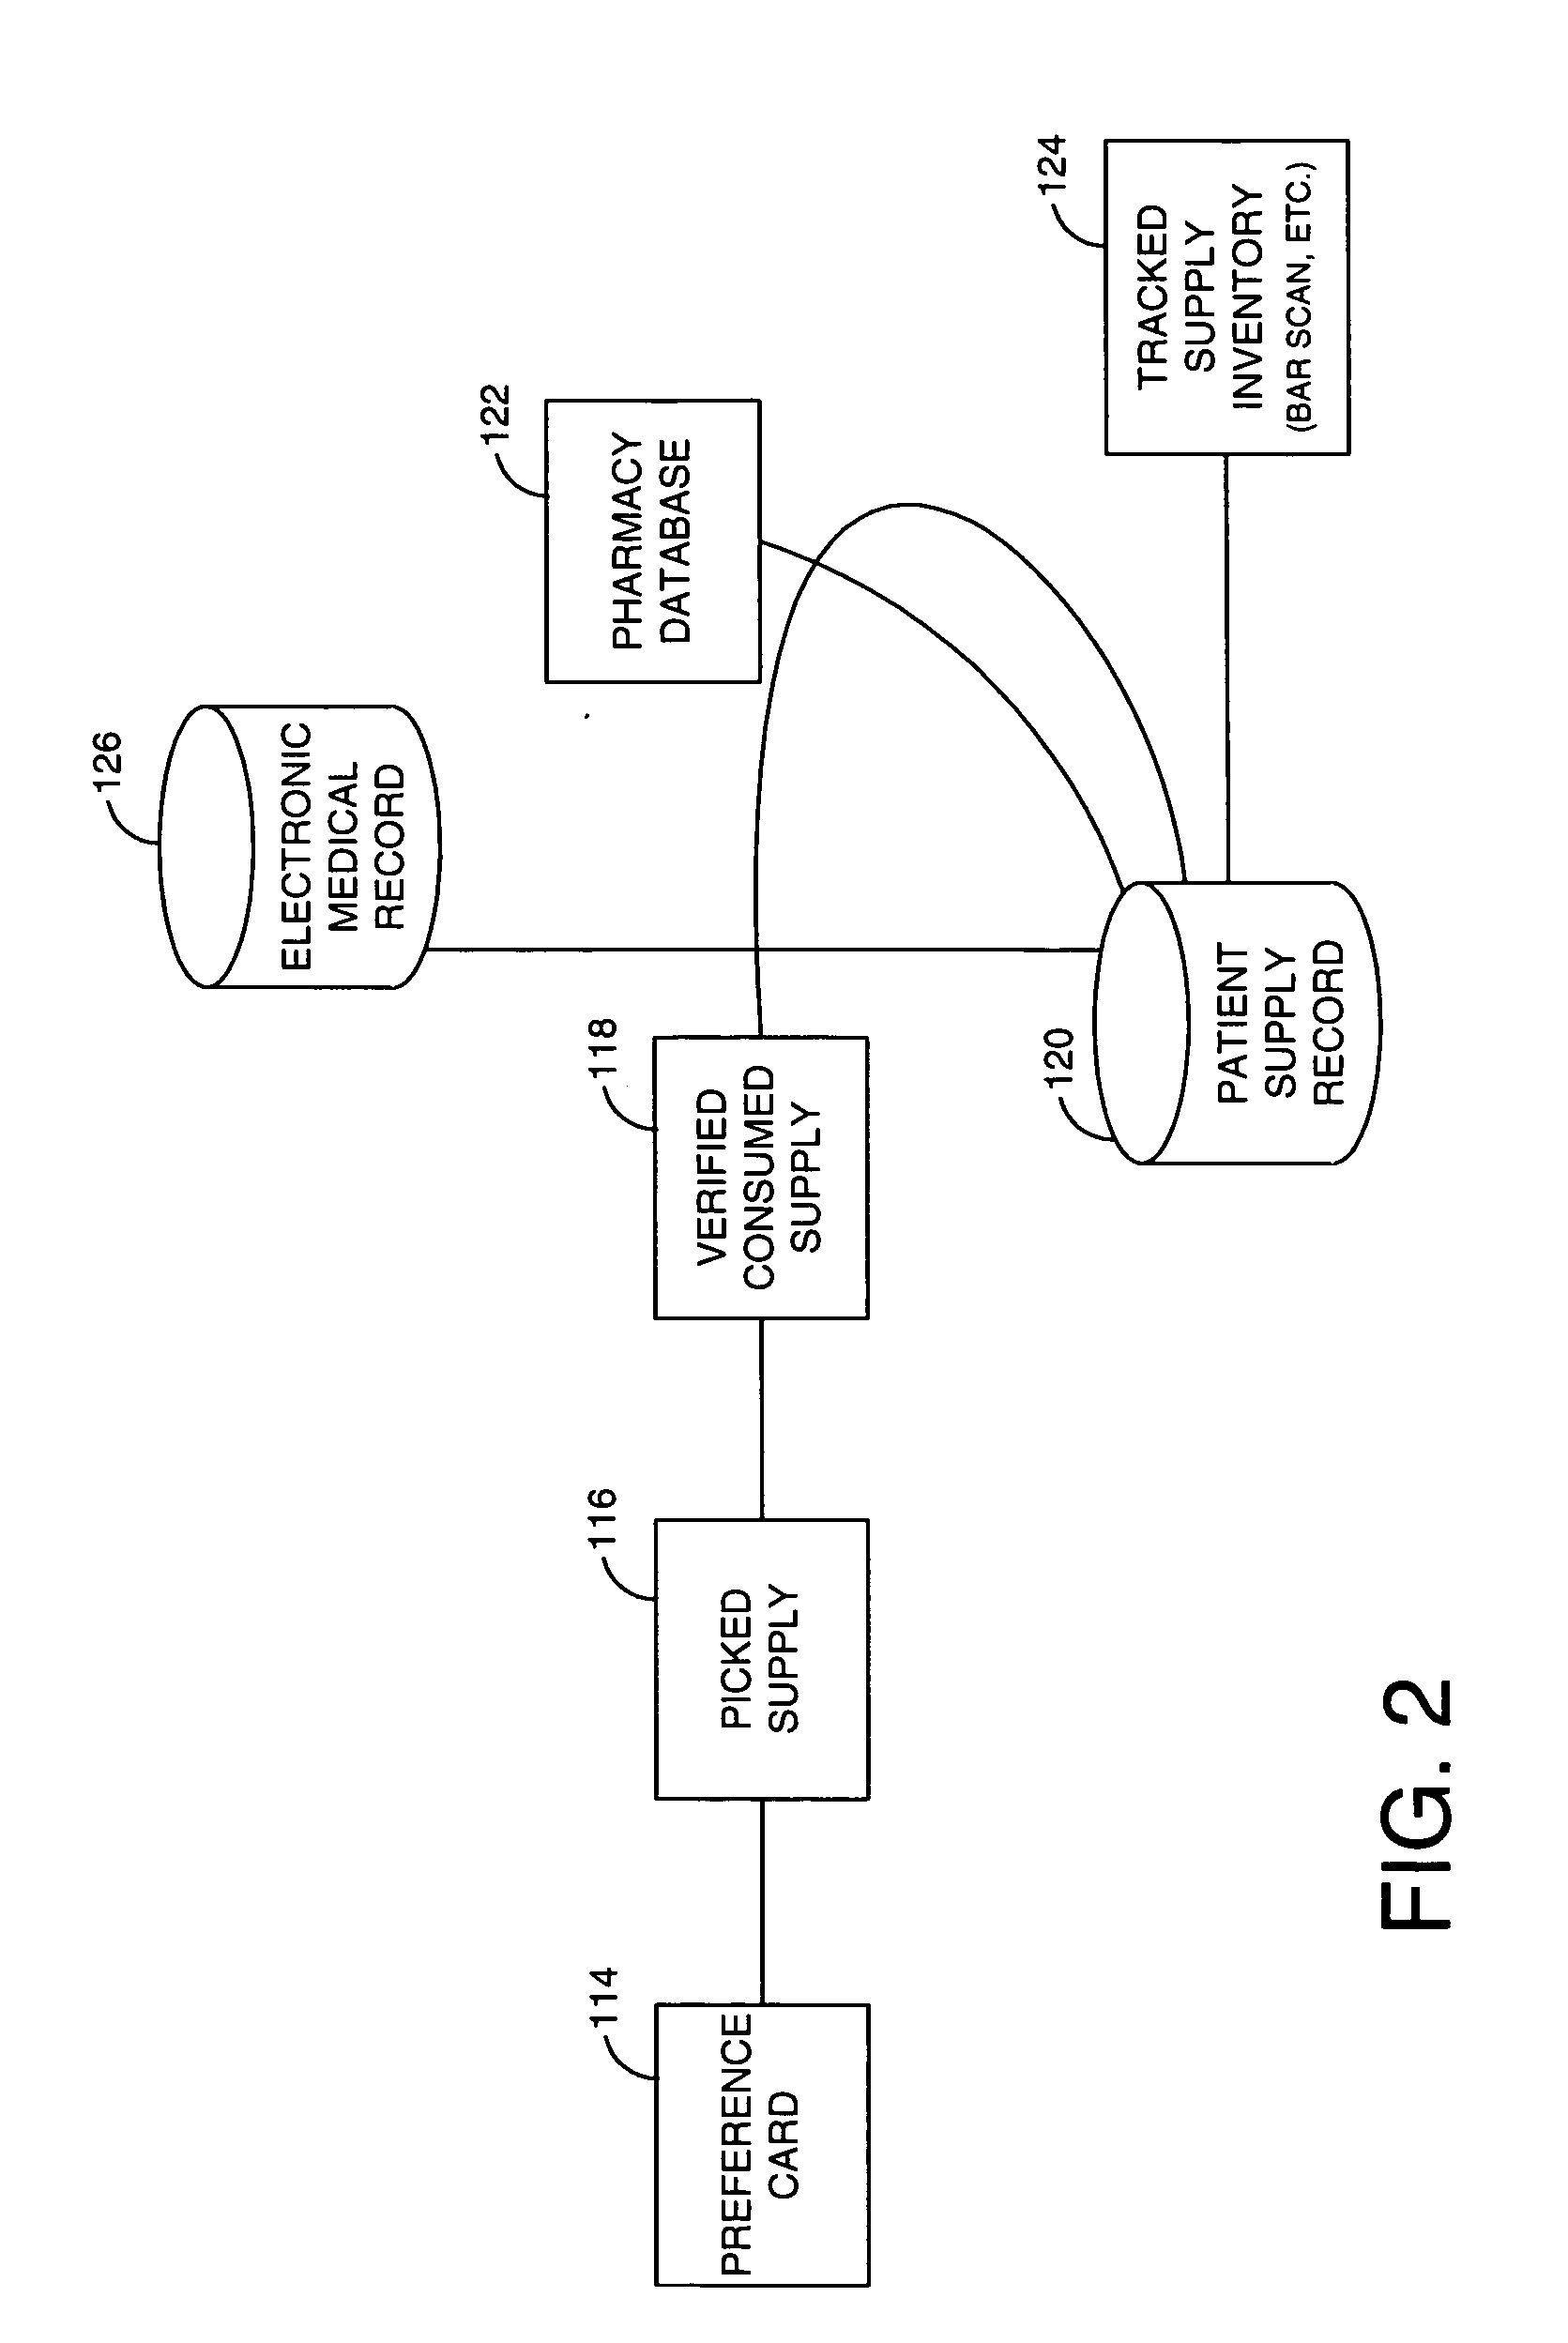 System and method for management of clinical supply operations